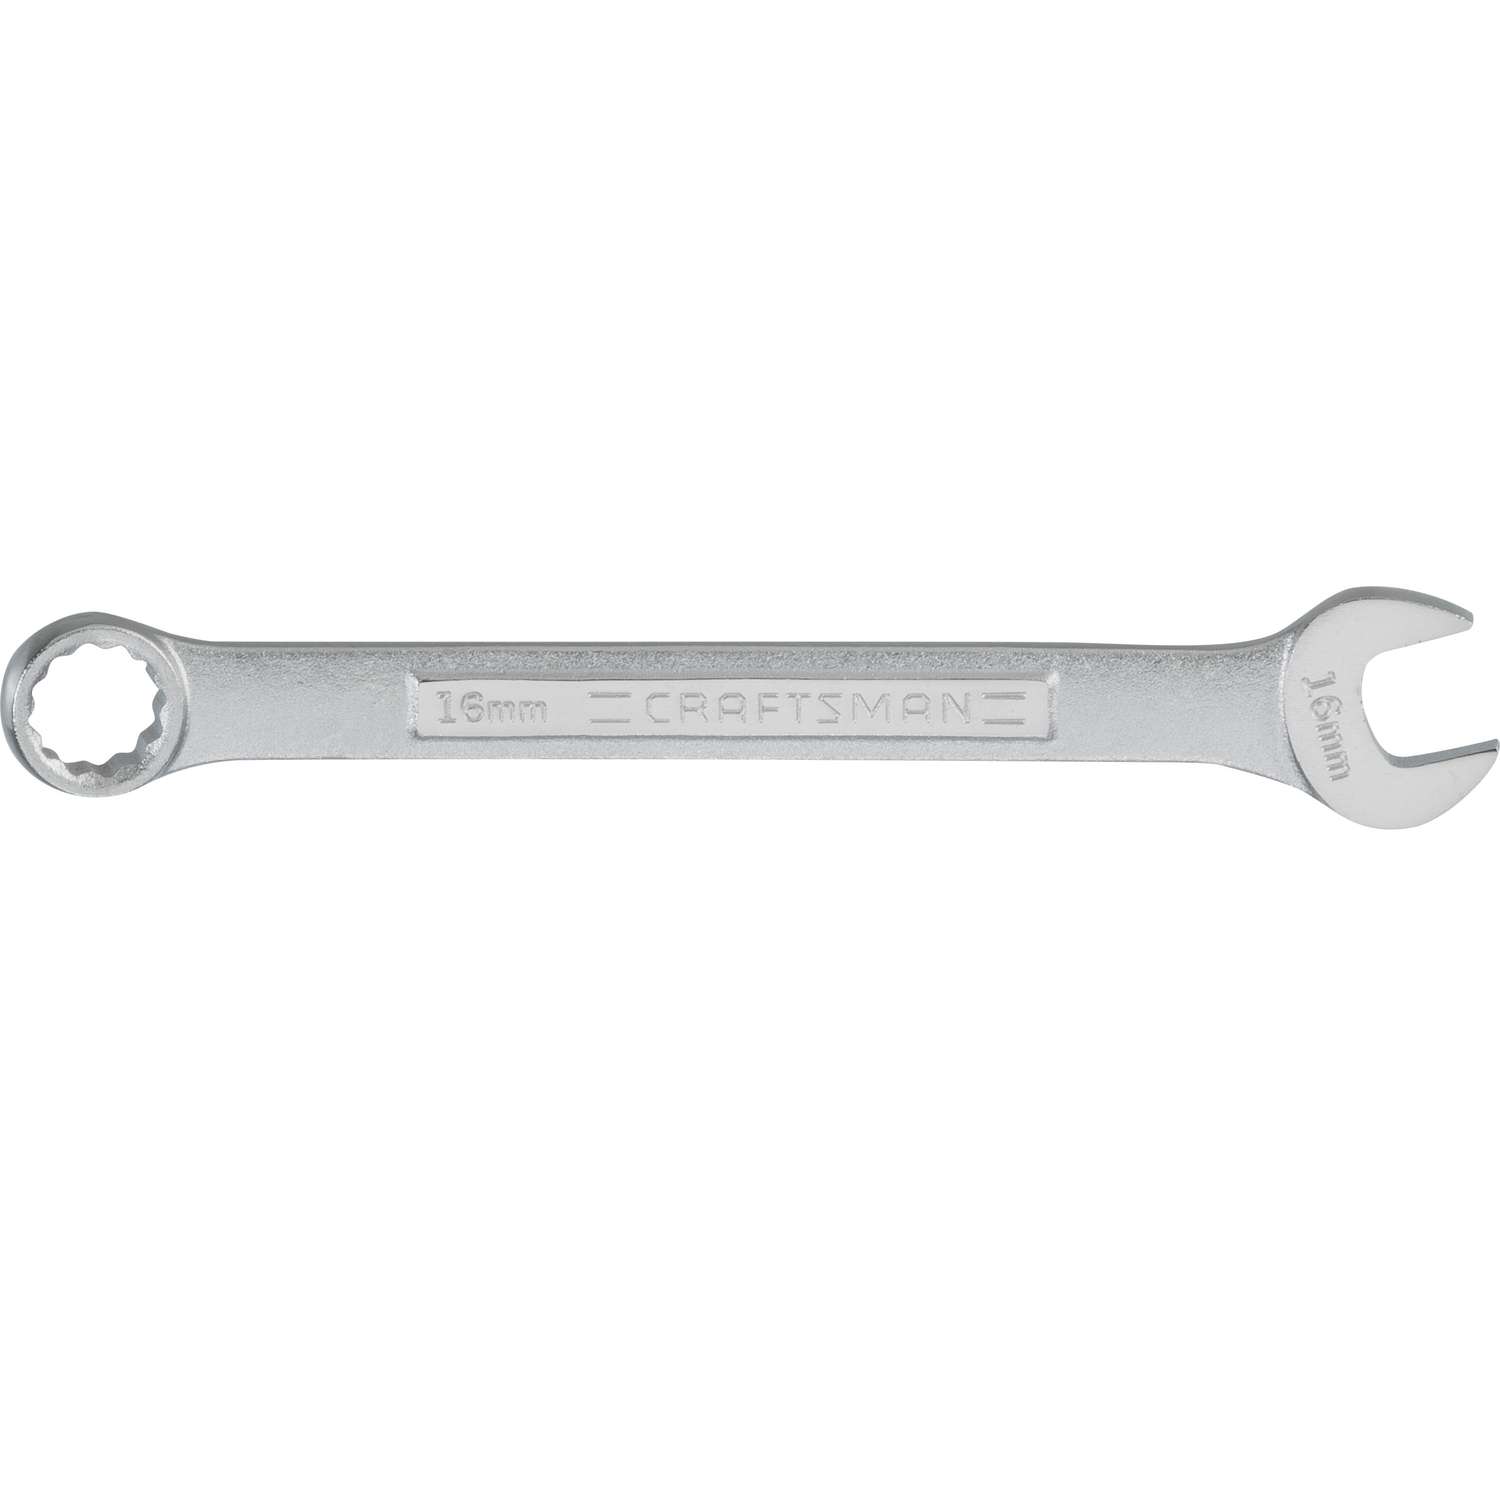 5/8" Ace Hardware Drop Forged 25766 12 Point Combination Wrench 